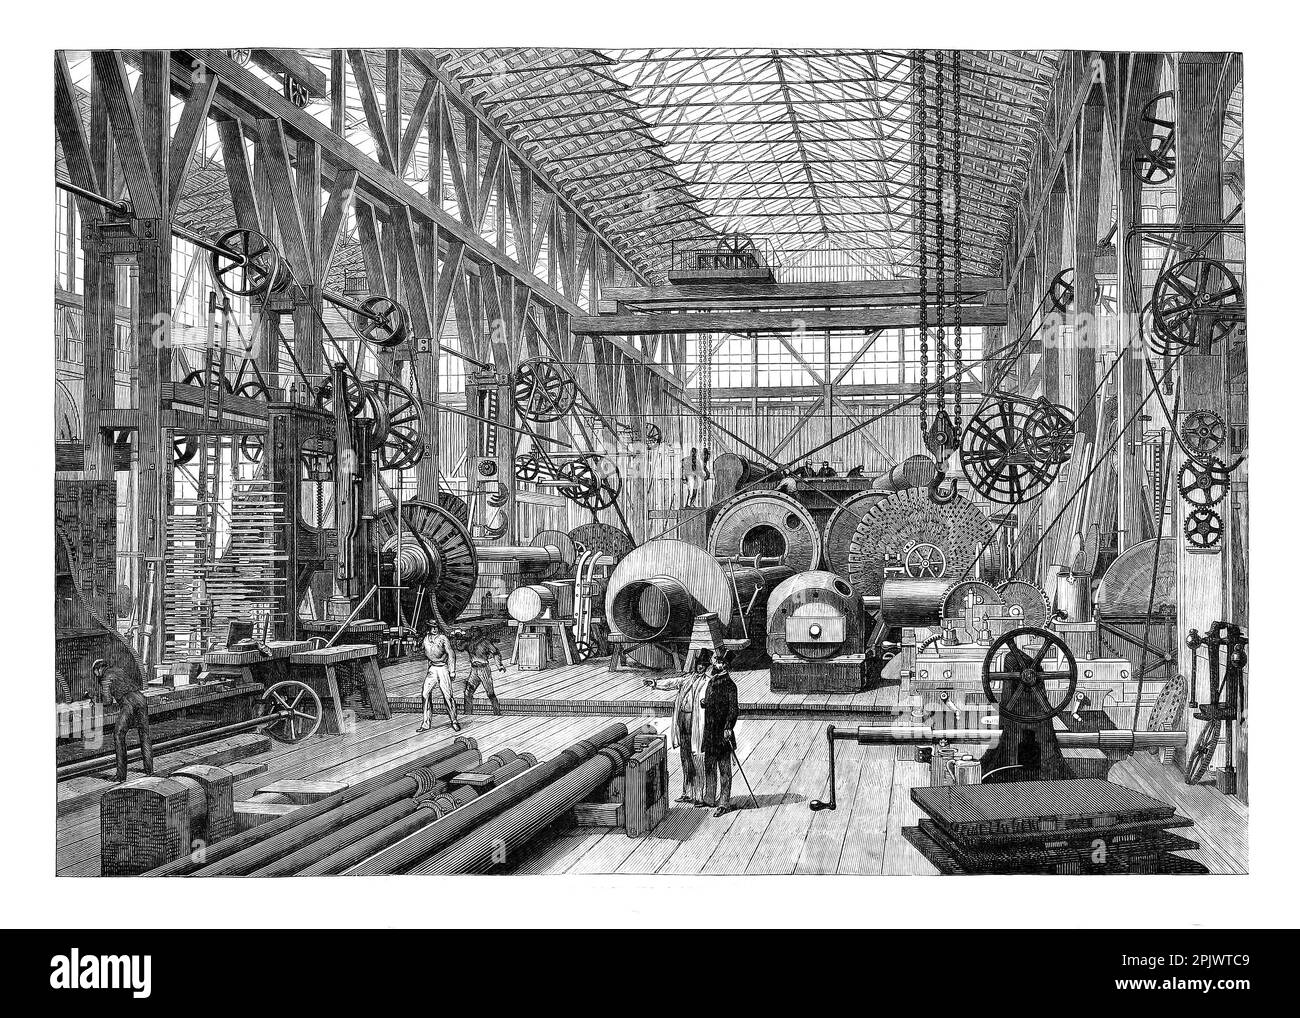 The large machine shop and turnery at Penn's Marine Engine Factory at Greenwich, London, England in 1865. The firm became the major supplier to the Royal Navy as it made the transition from sail to steam power. Stock Photo